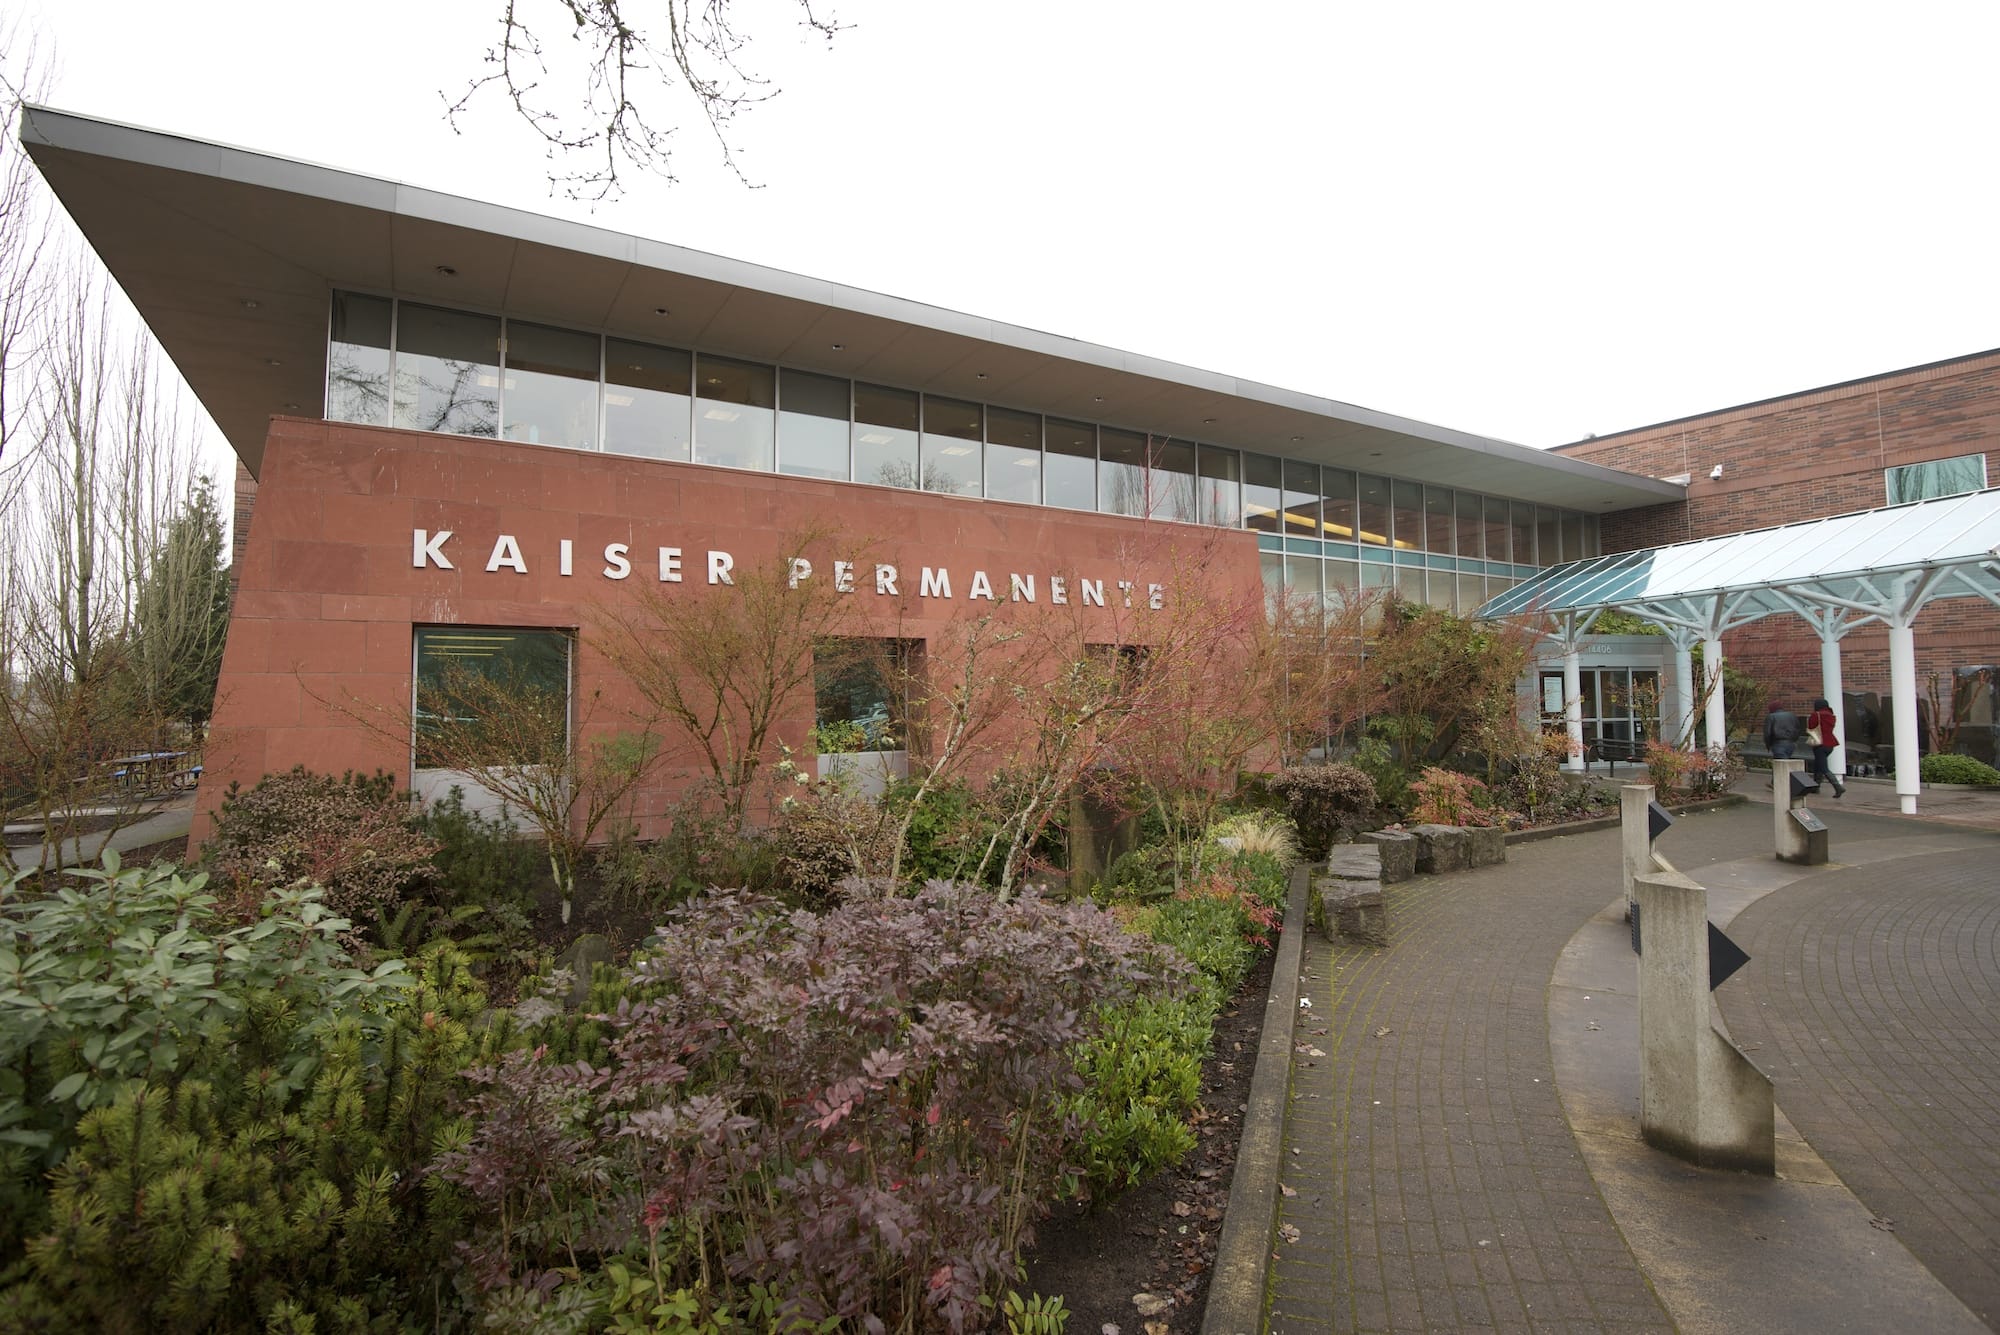 Kaiser Permanente Northwest said today it will no longer buy furniture treated with flame-retardant chemicals.